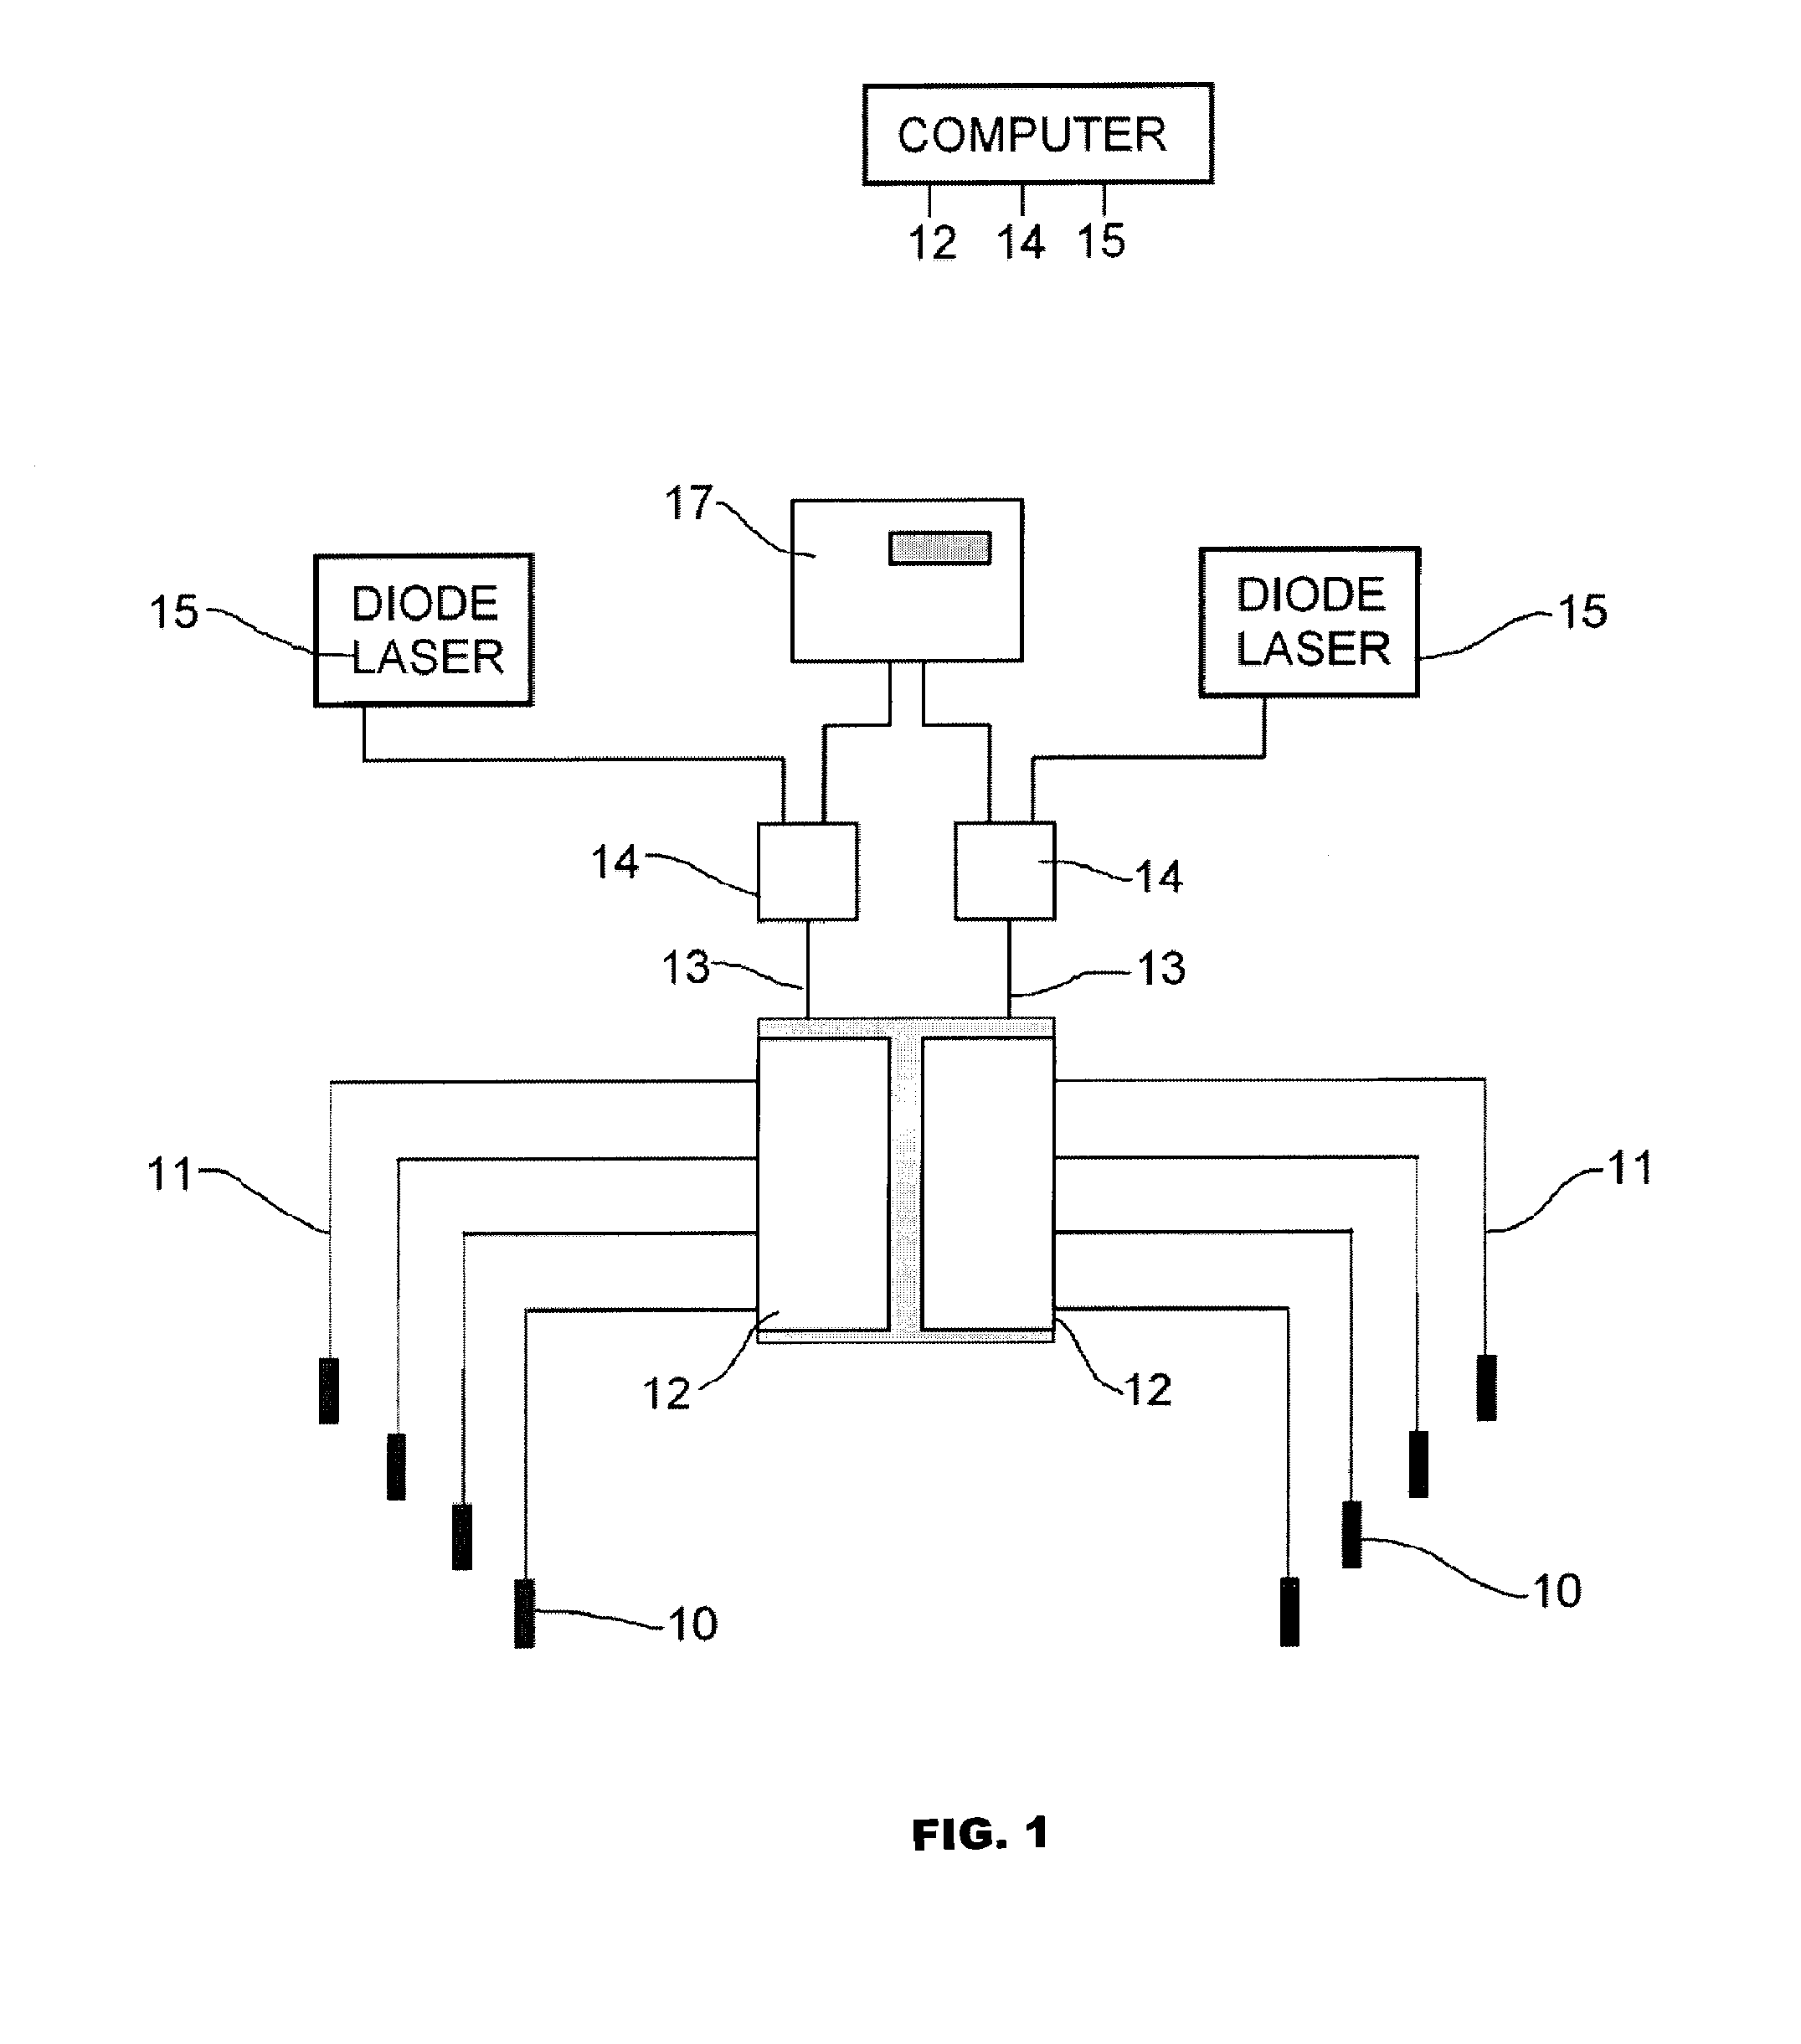 Switched photodynamic therapy apparatus and method